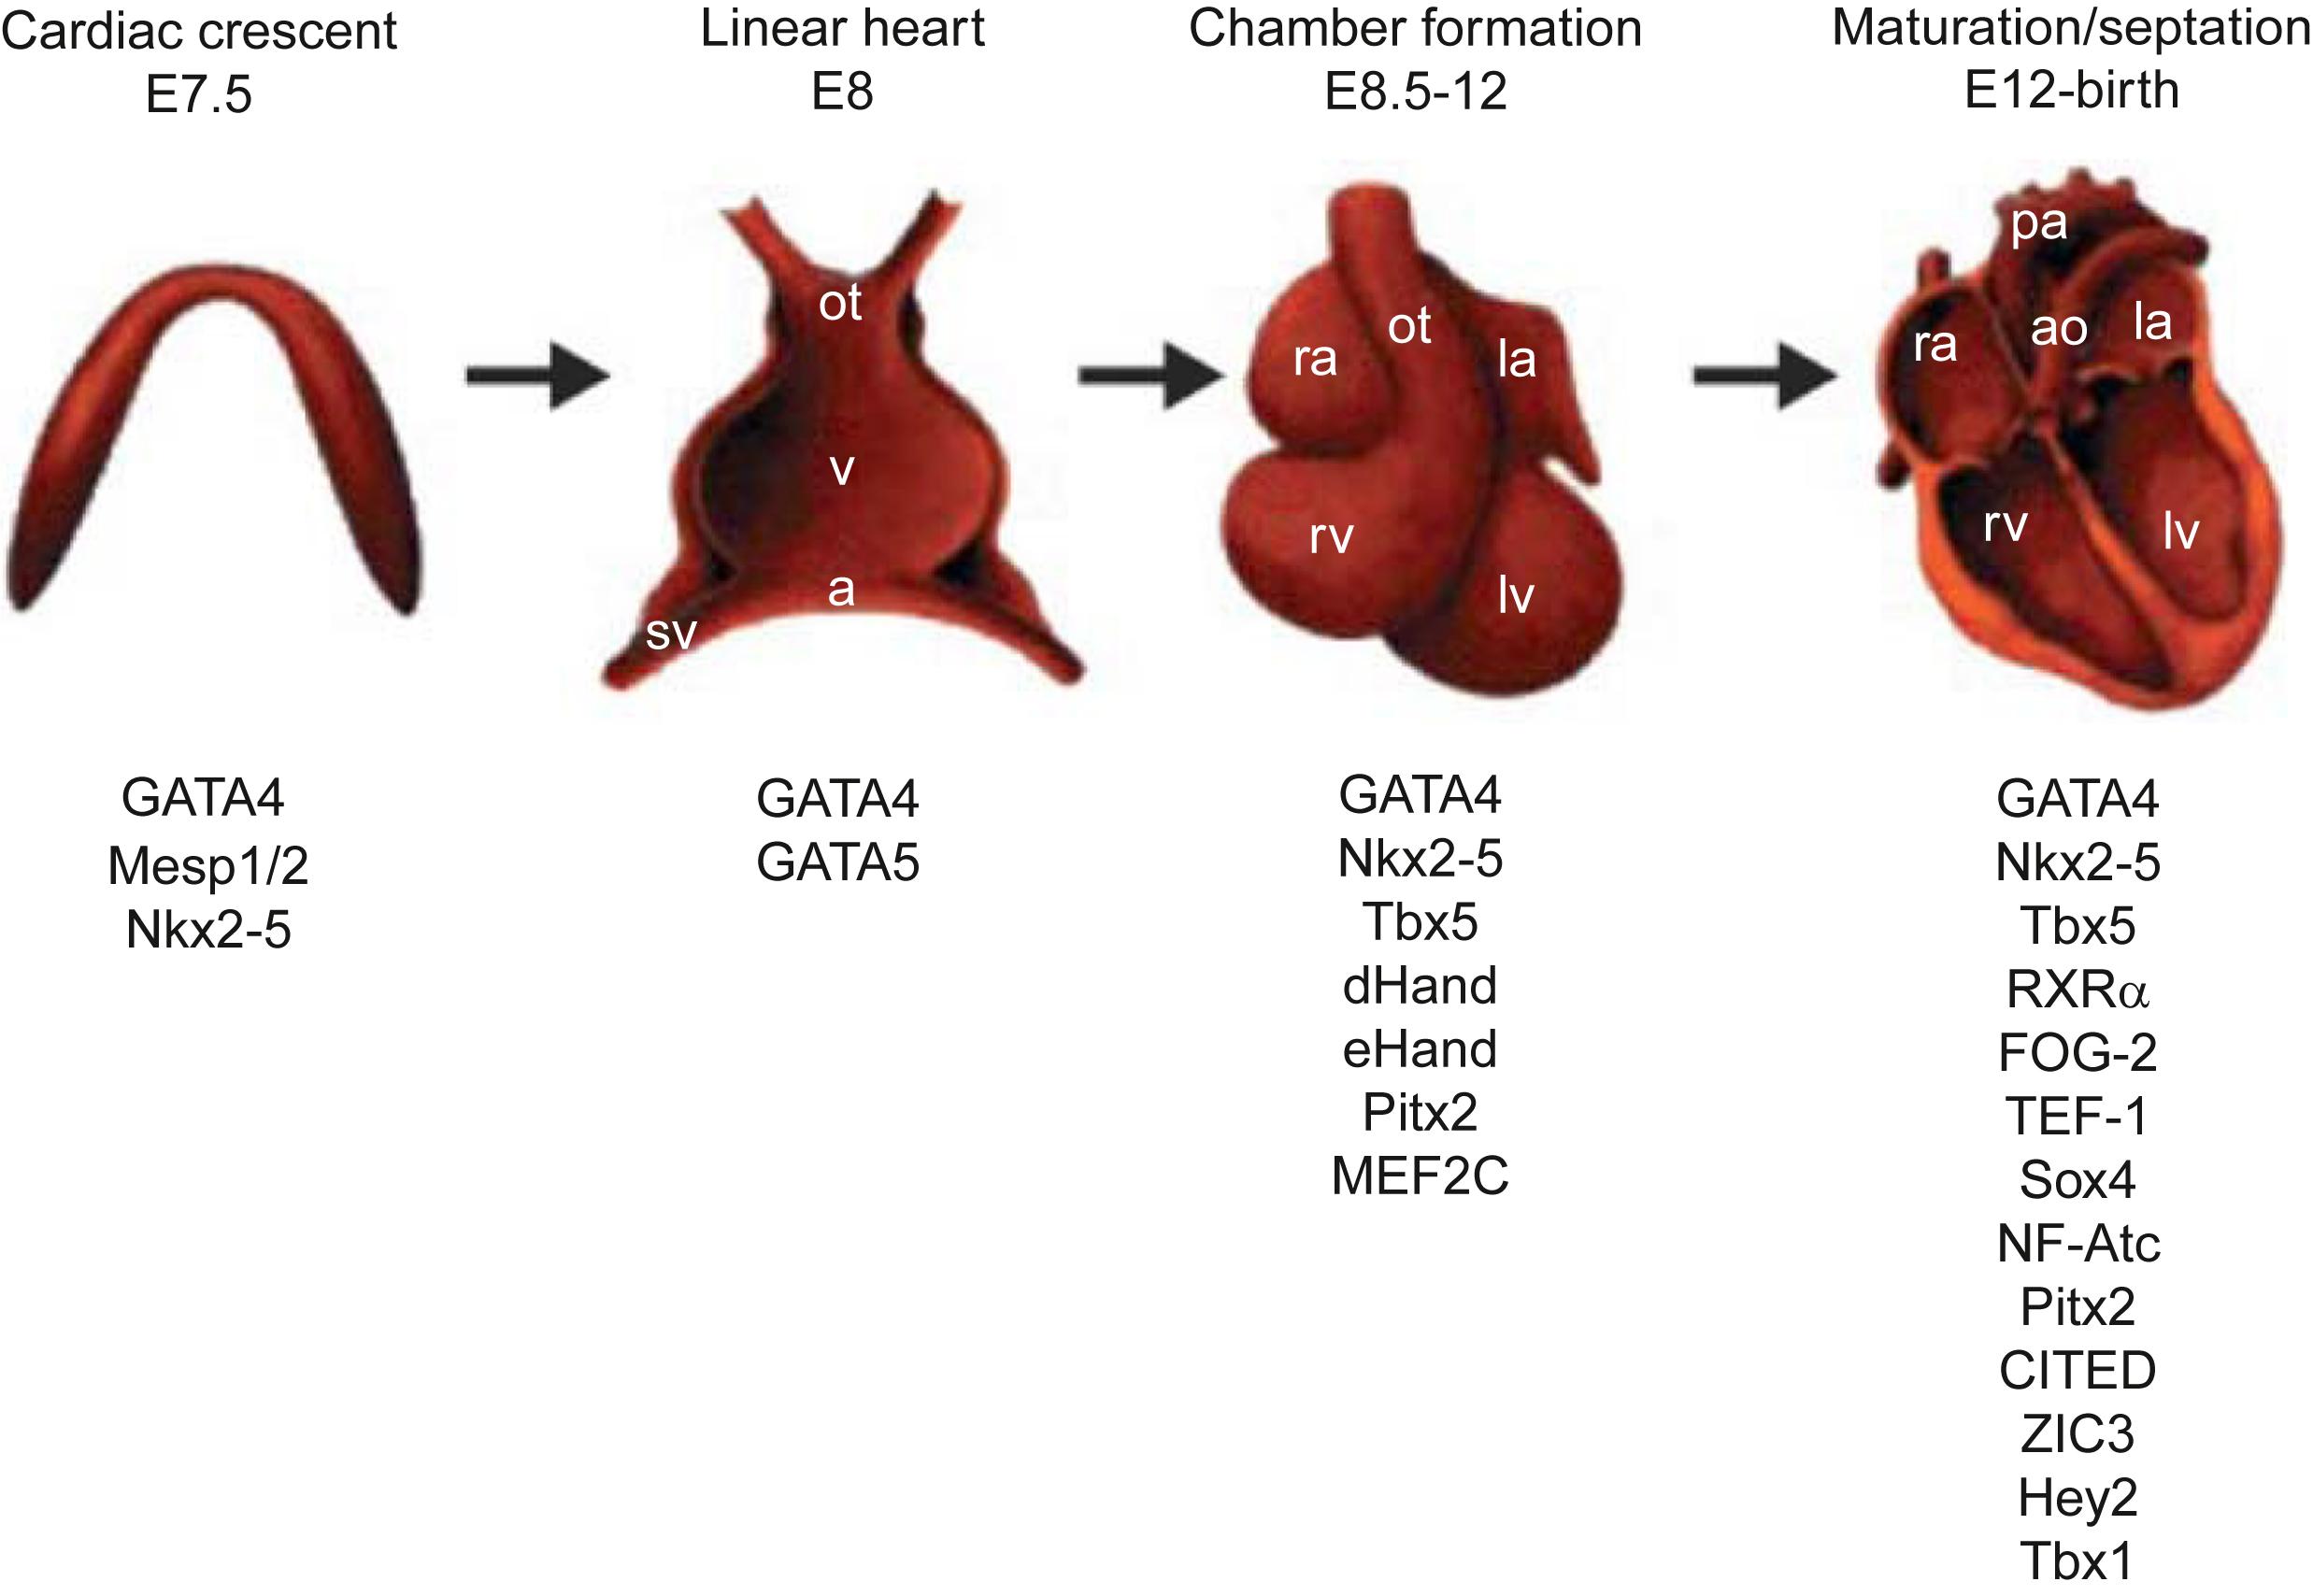 Figure 6.1, Schematic representations of the major stages of heart development. The indicated embryonic days (E) correspond to mouse embryos. Except for GATA-5 (zebrafish), the role of the indicated transcriptional factors (TFs) was identified mostly through mouse genetics. a, Atria; a o , aorta; la, left atrium; lv, left ventricle; ot, outflow tract; pa, pulmonary aorta/trunk; ra, right atrium; rv, right ventricle; sv, sinus venosus; v, ventricle.